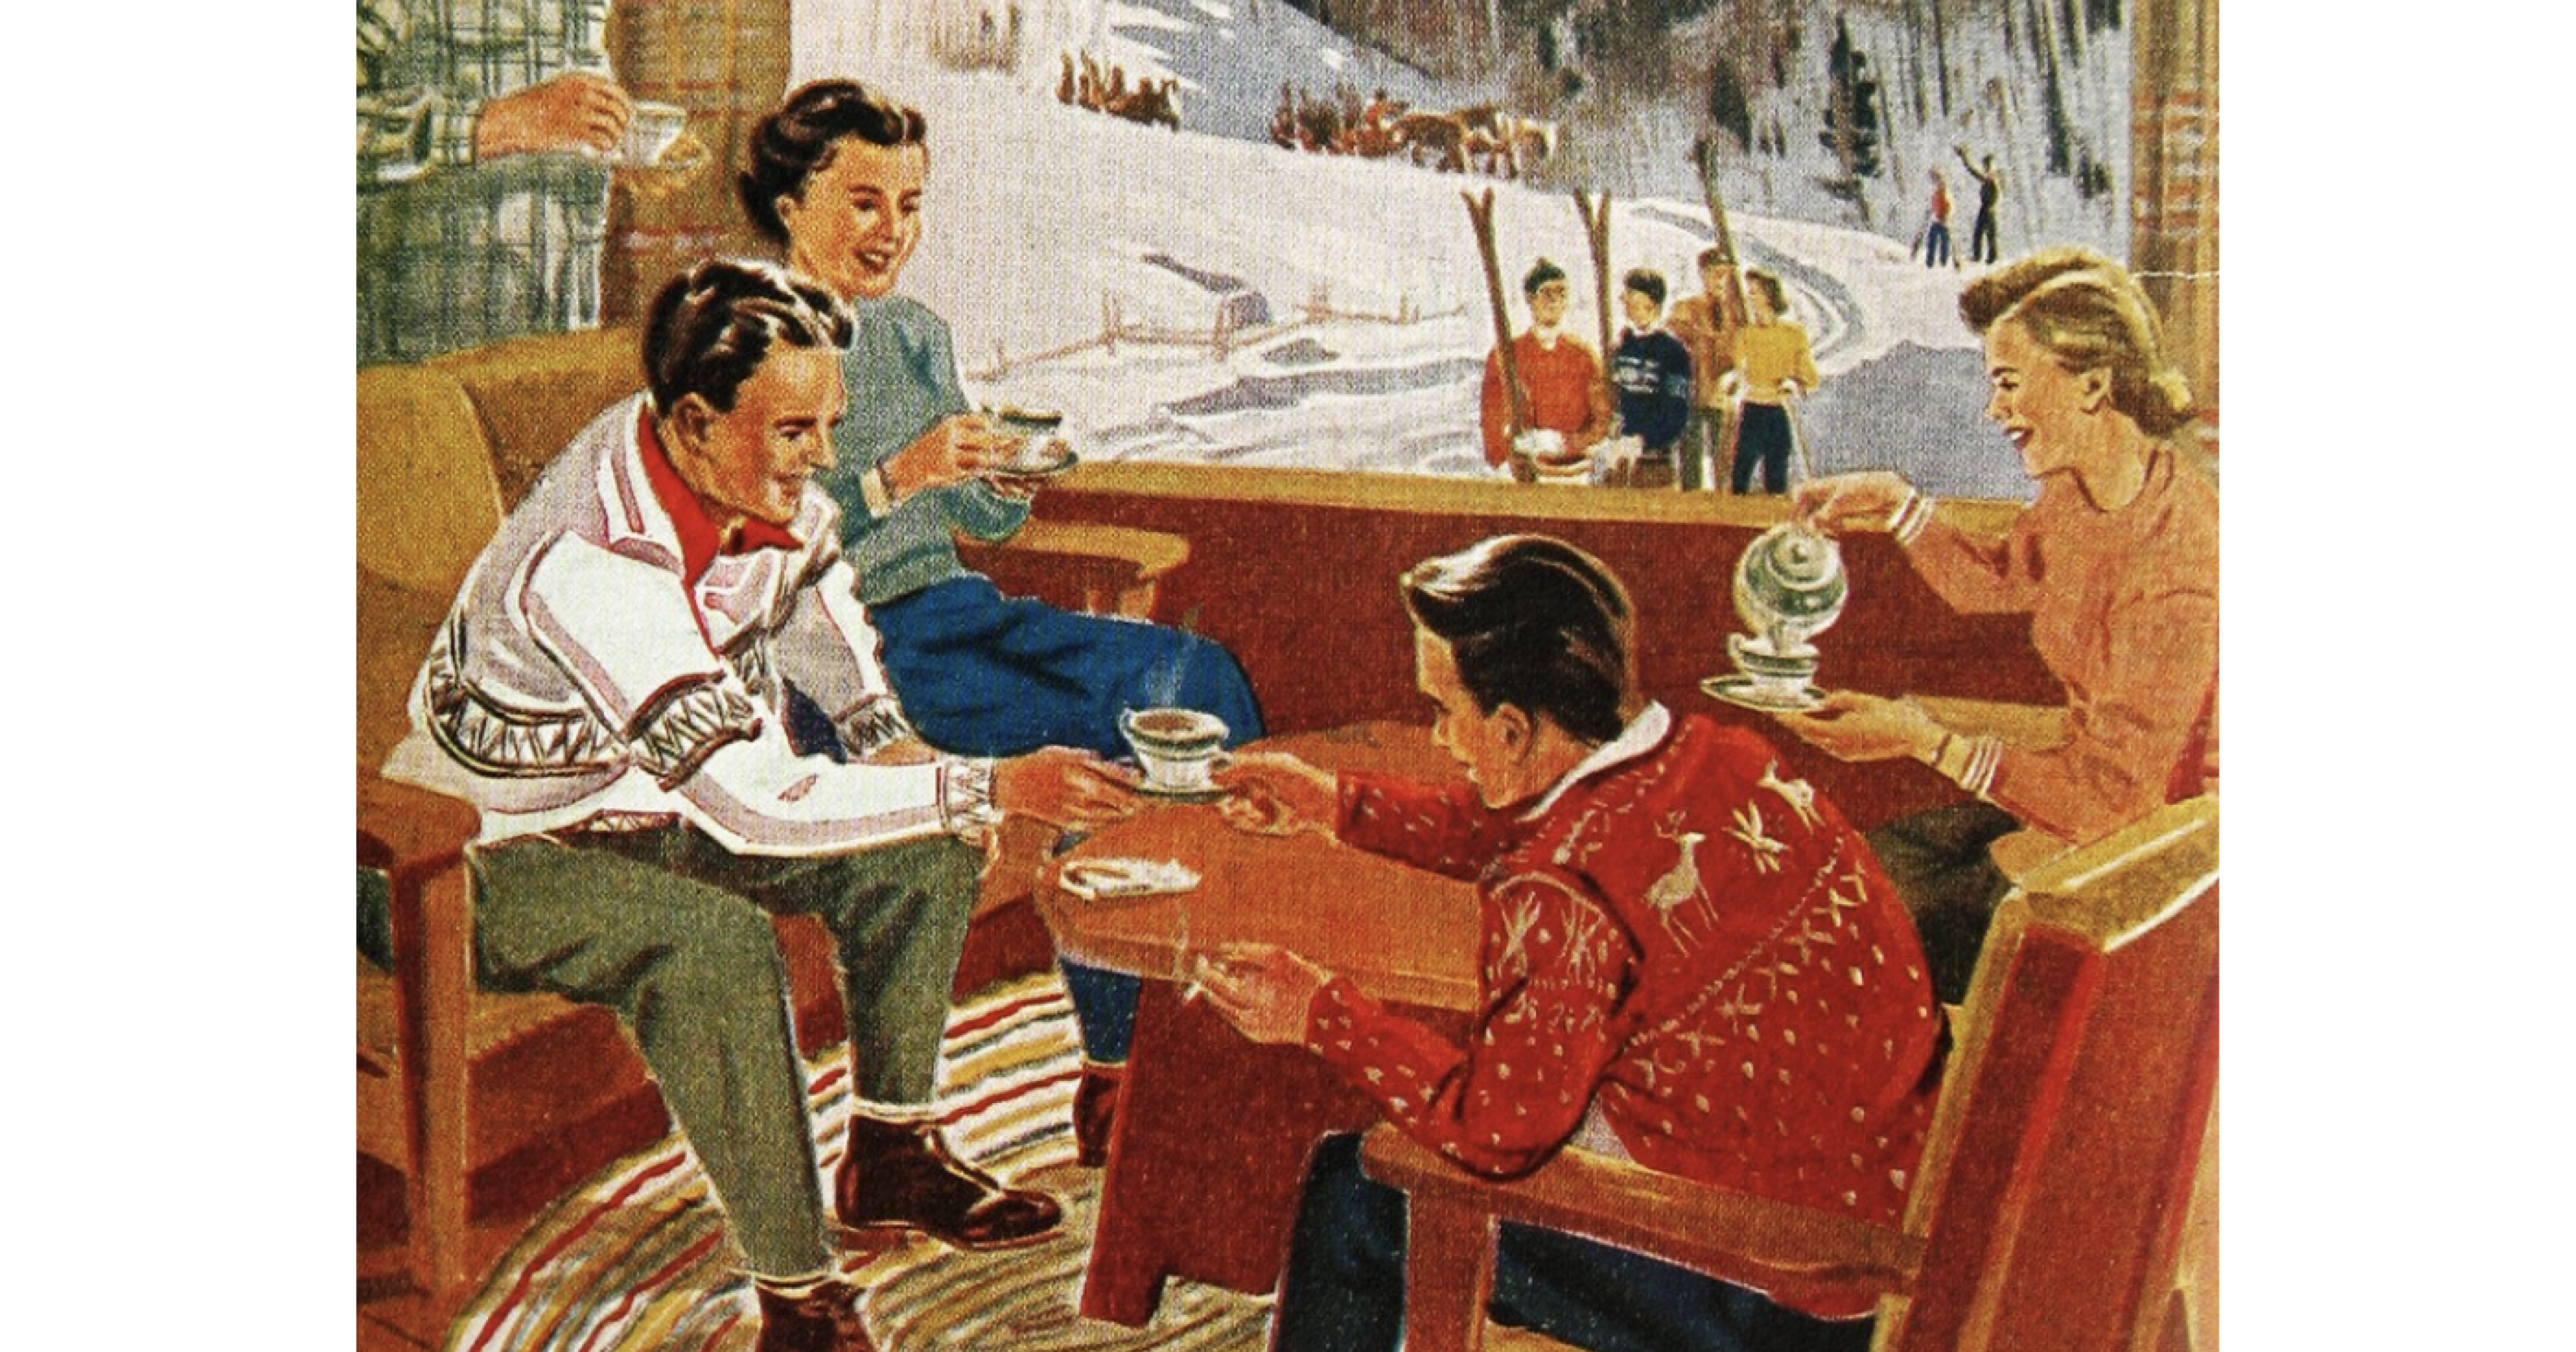 Two couples sit sipping tea and laughing at a ski lodge